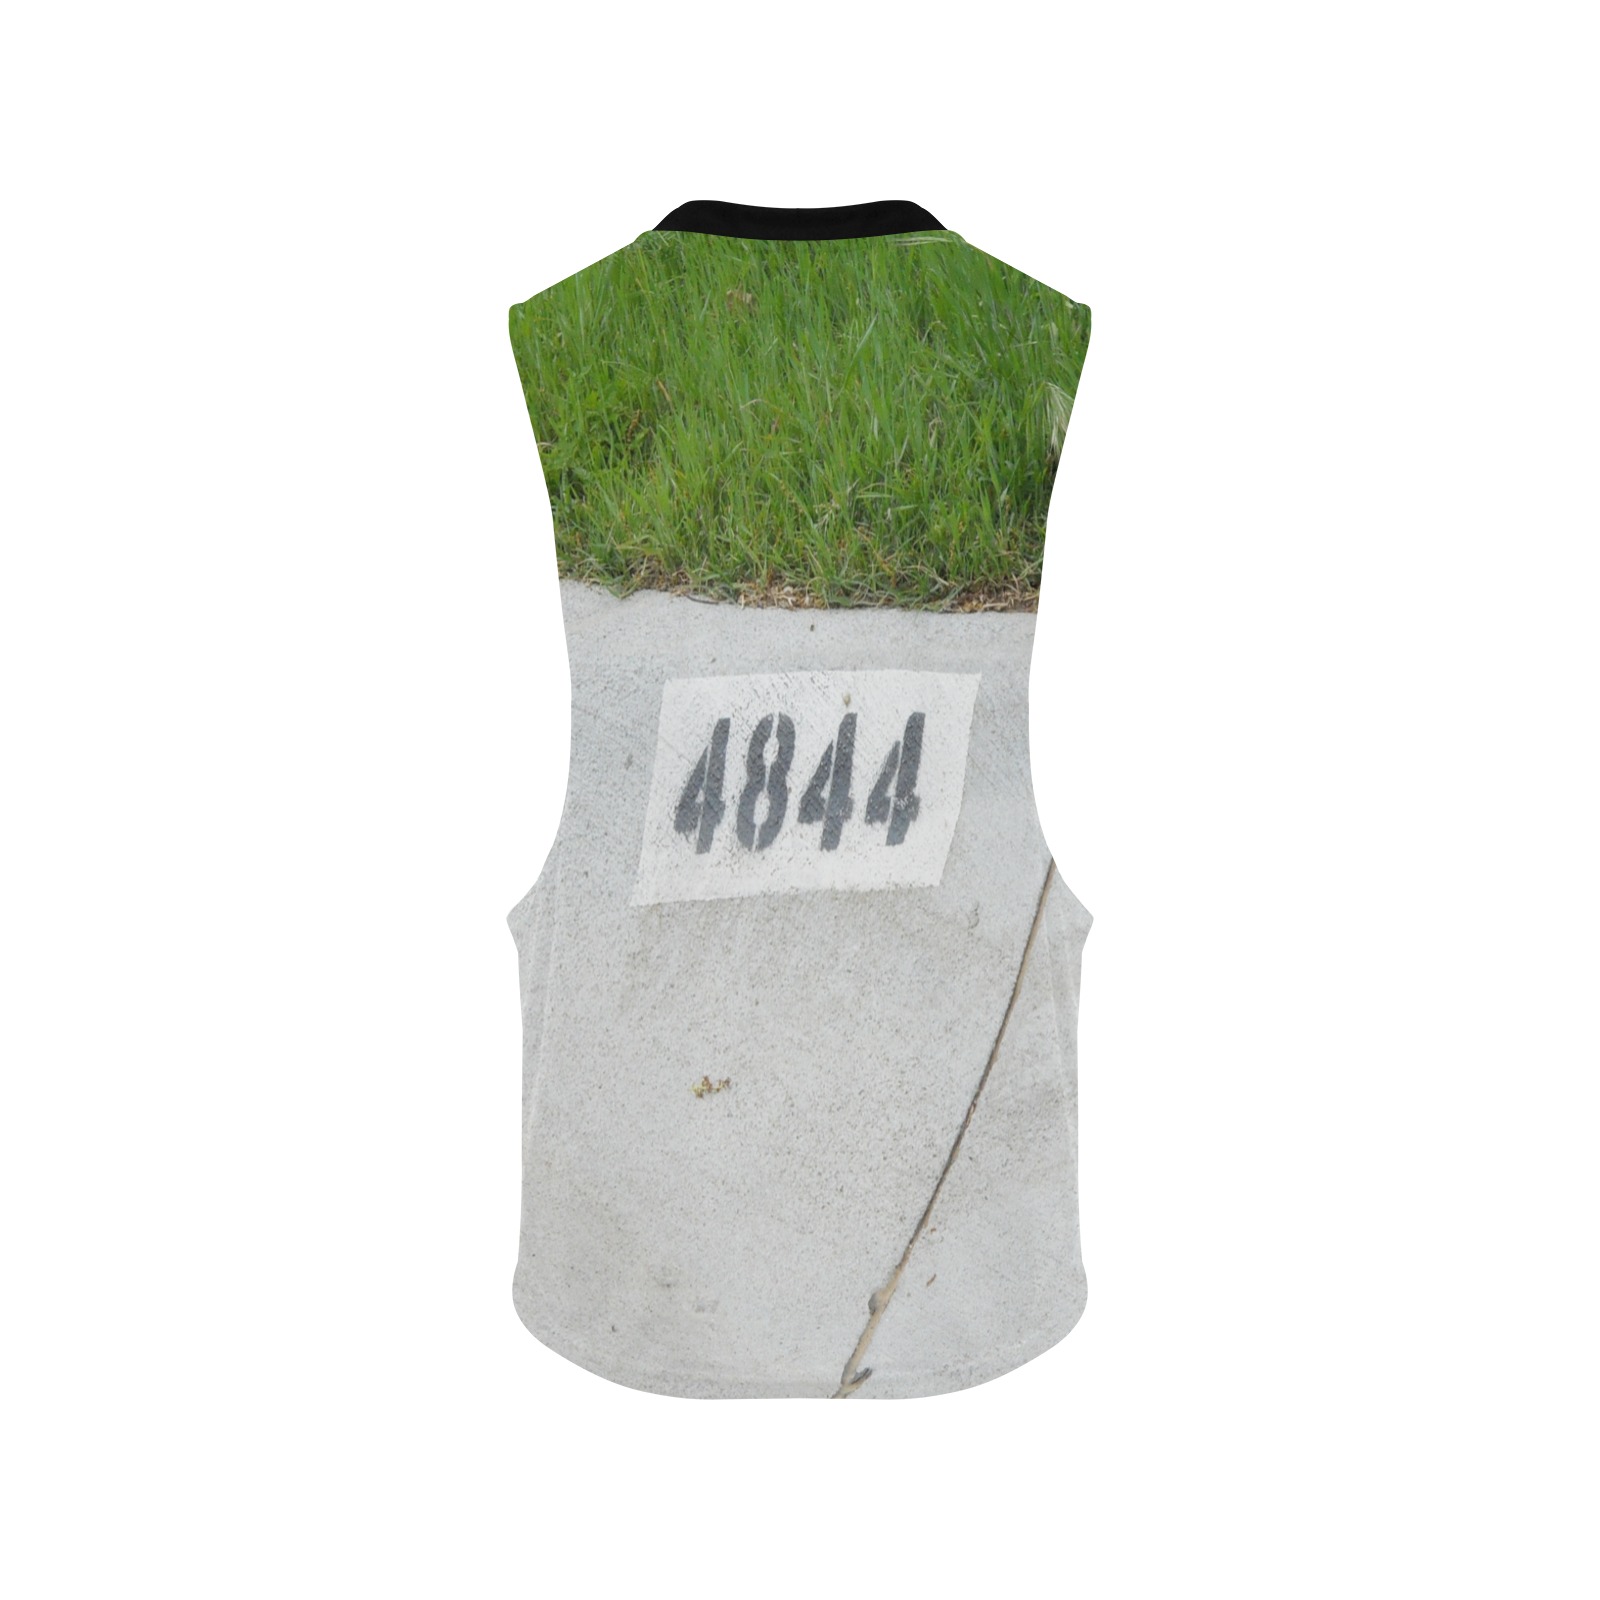 Street Number 4844 with Black Collar Men's Open Sides Workout Tank Top (Model T72)